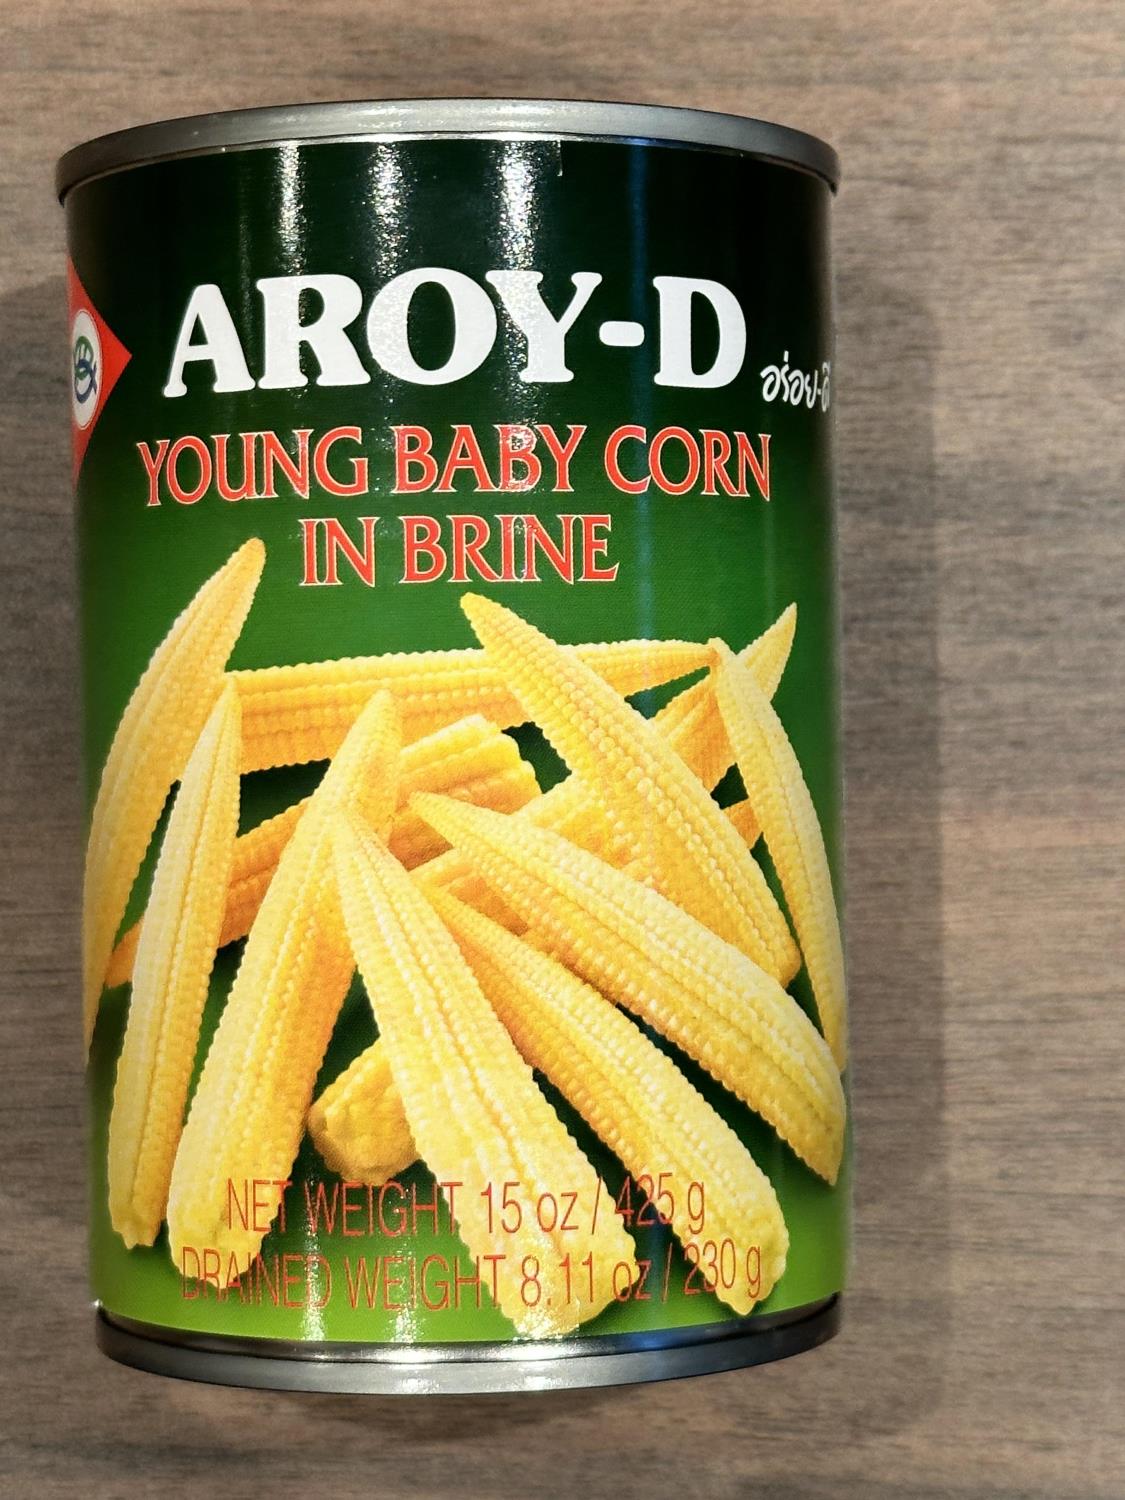 Aroy - D canned young baby corn